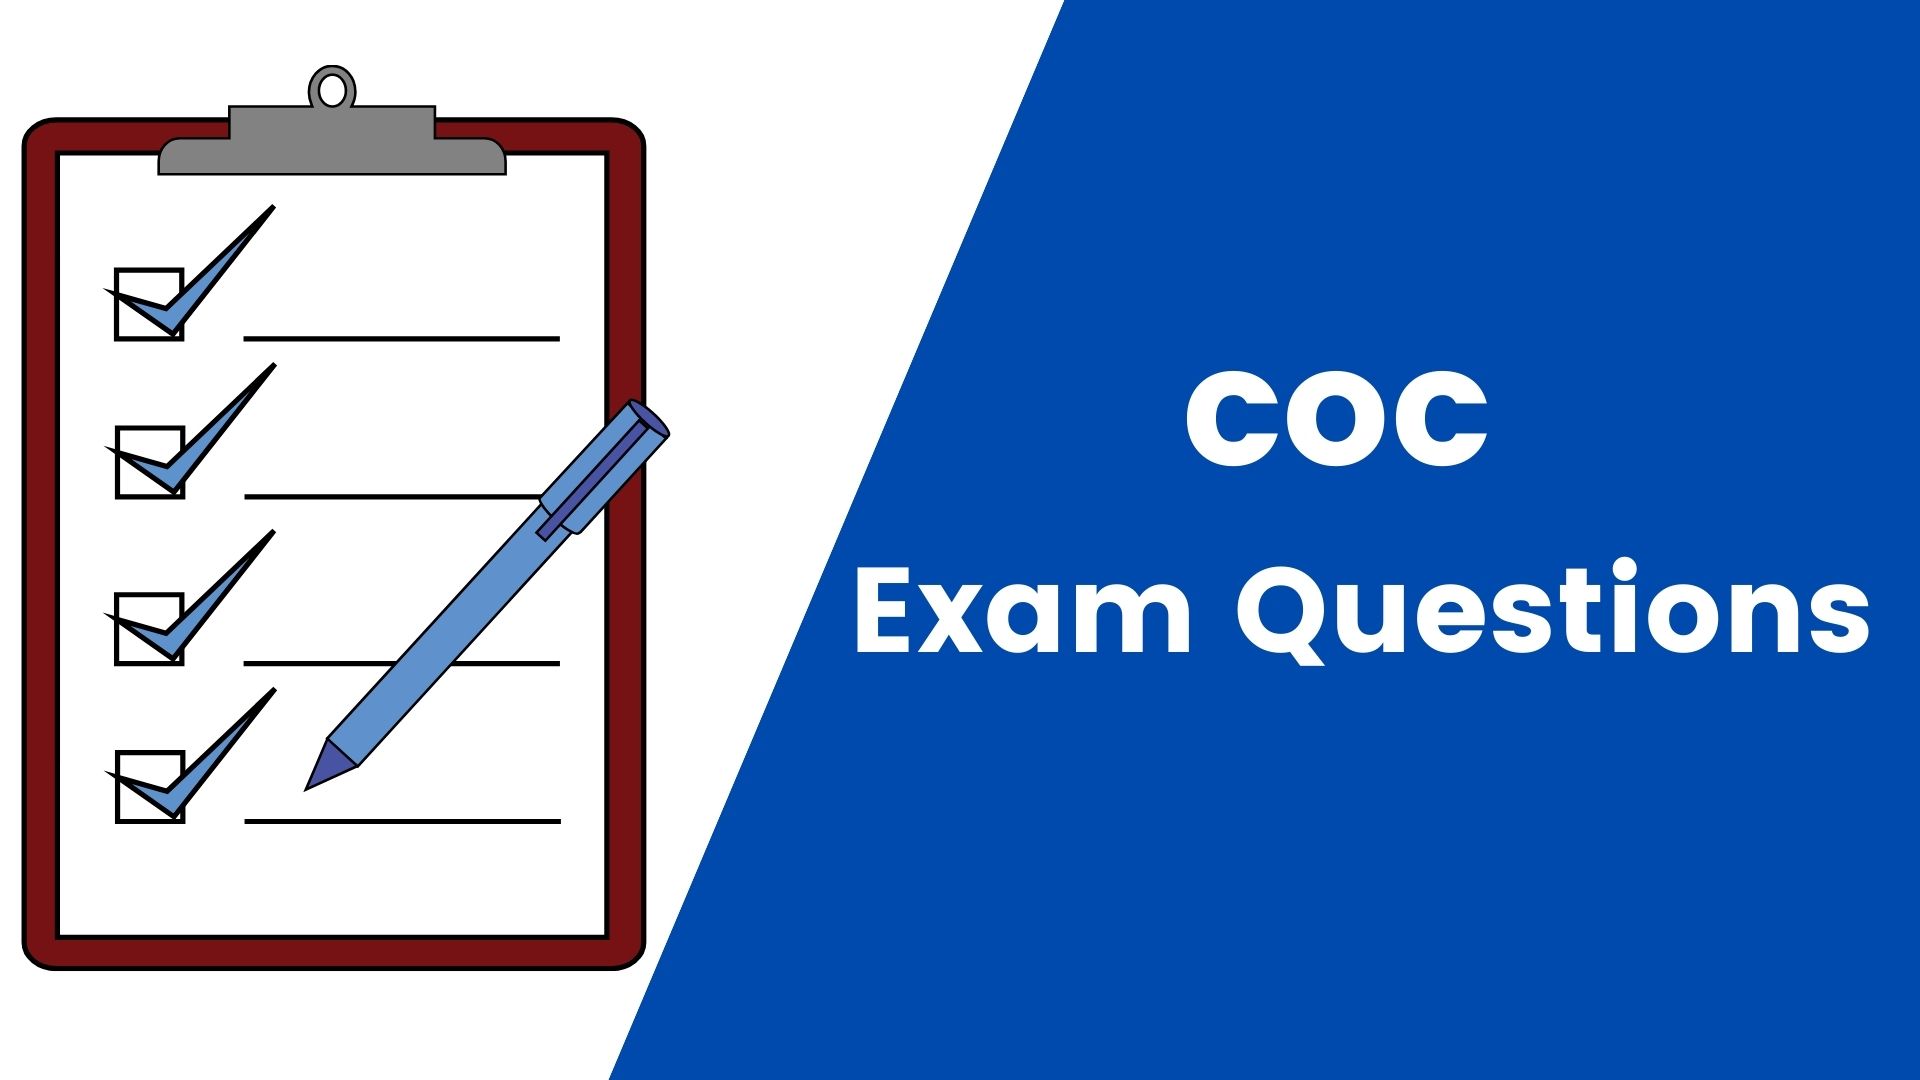 COC exam questions of past papers